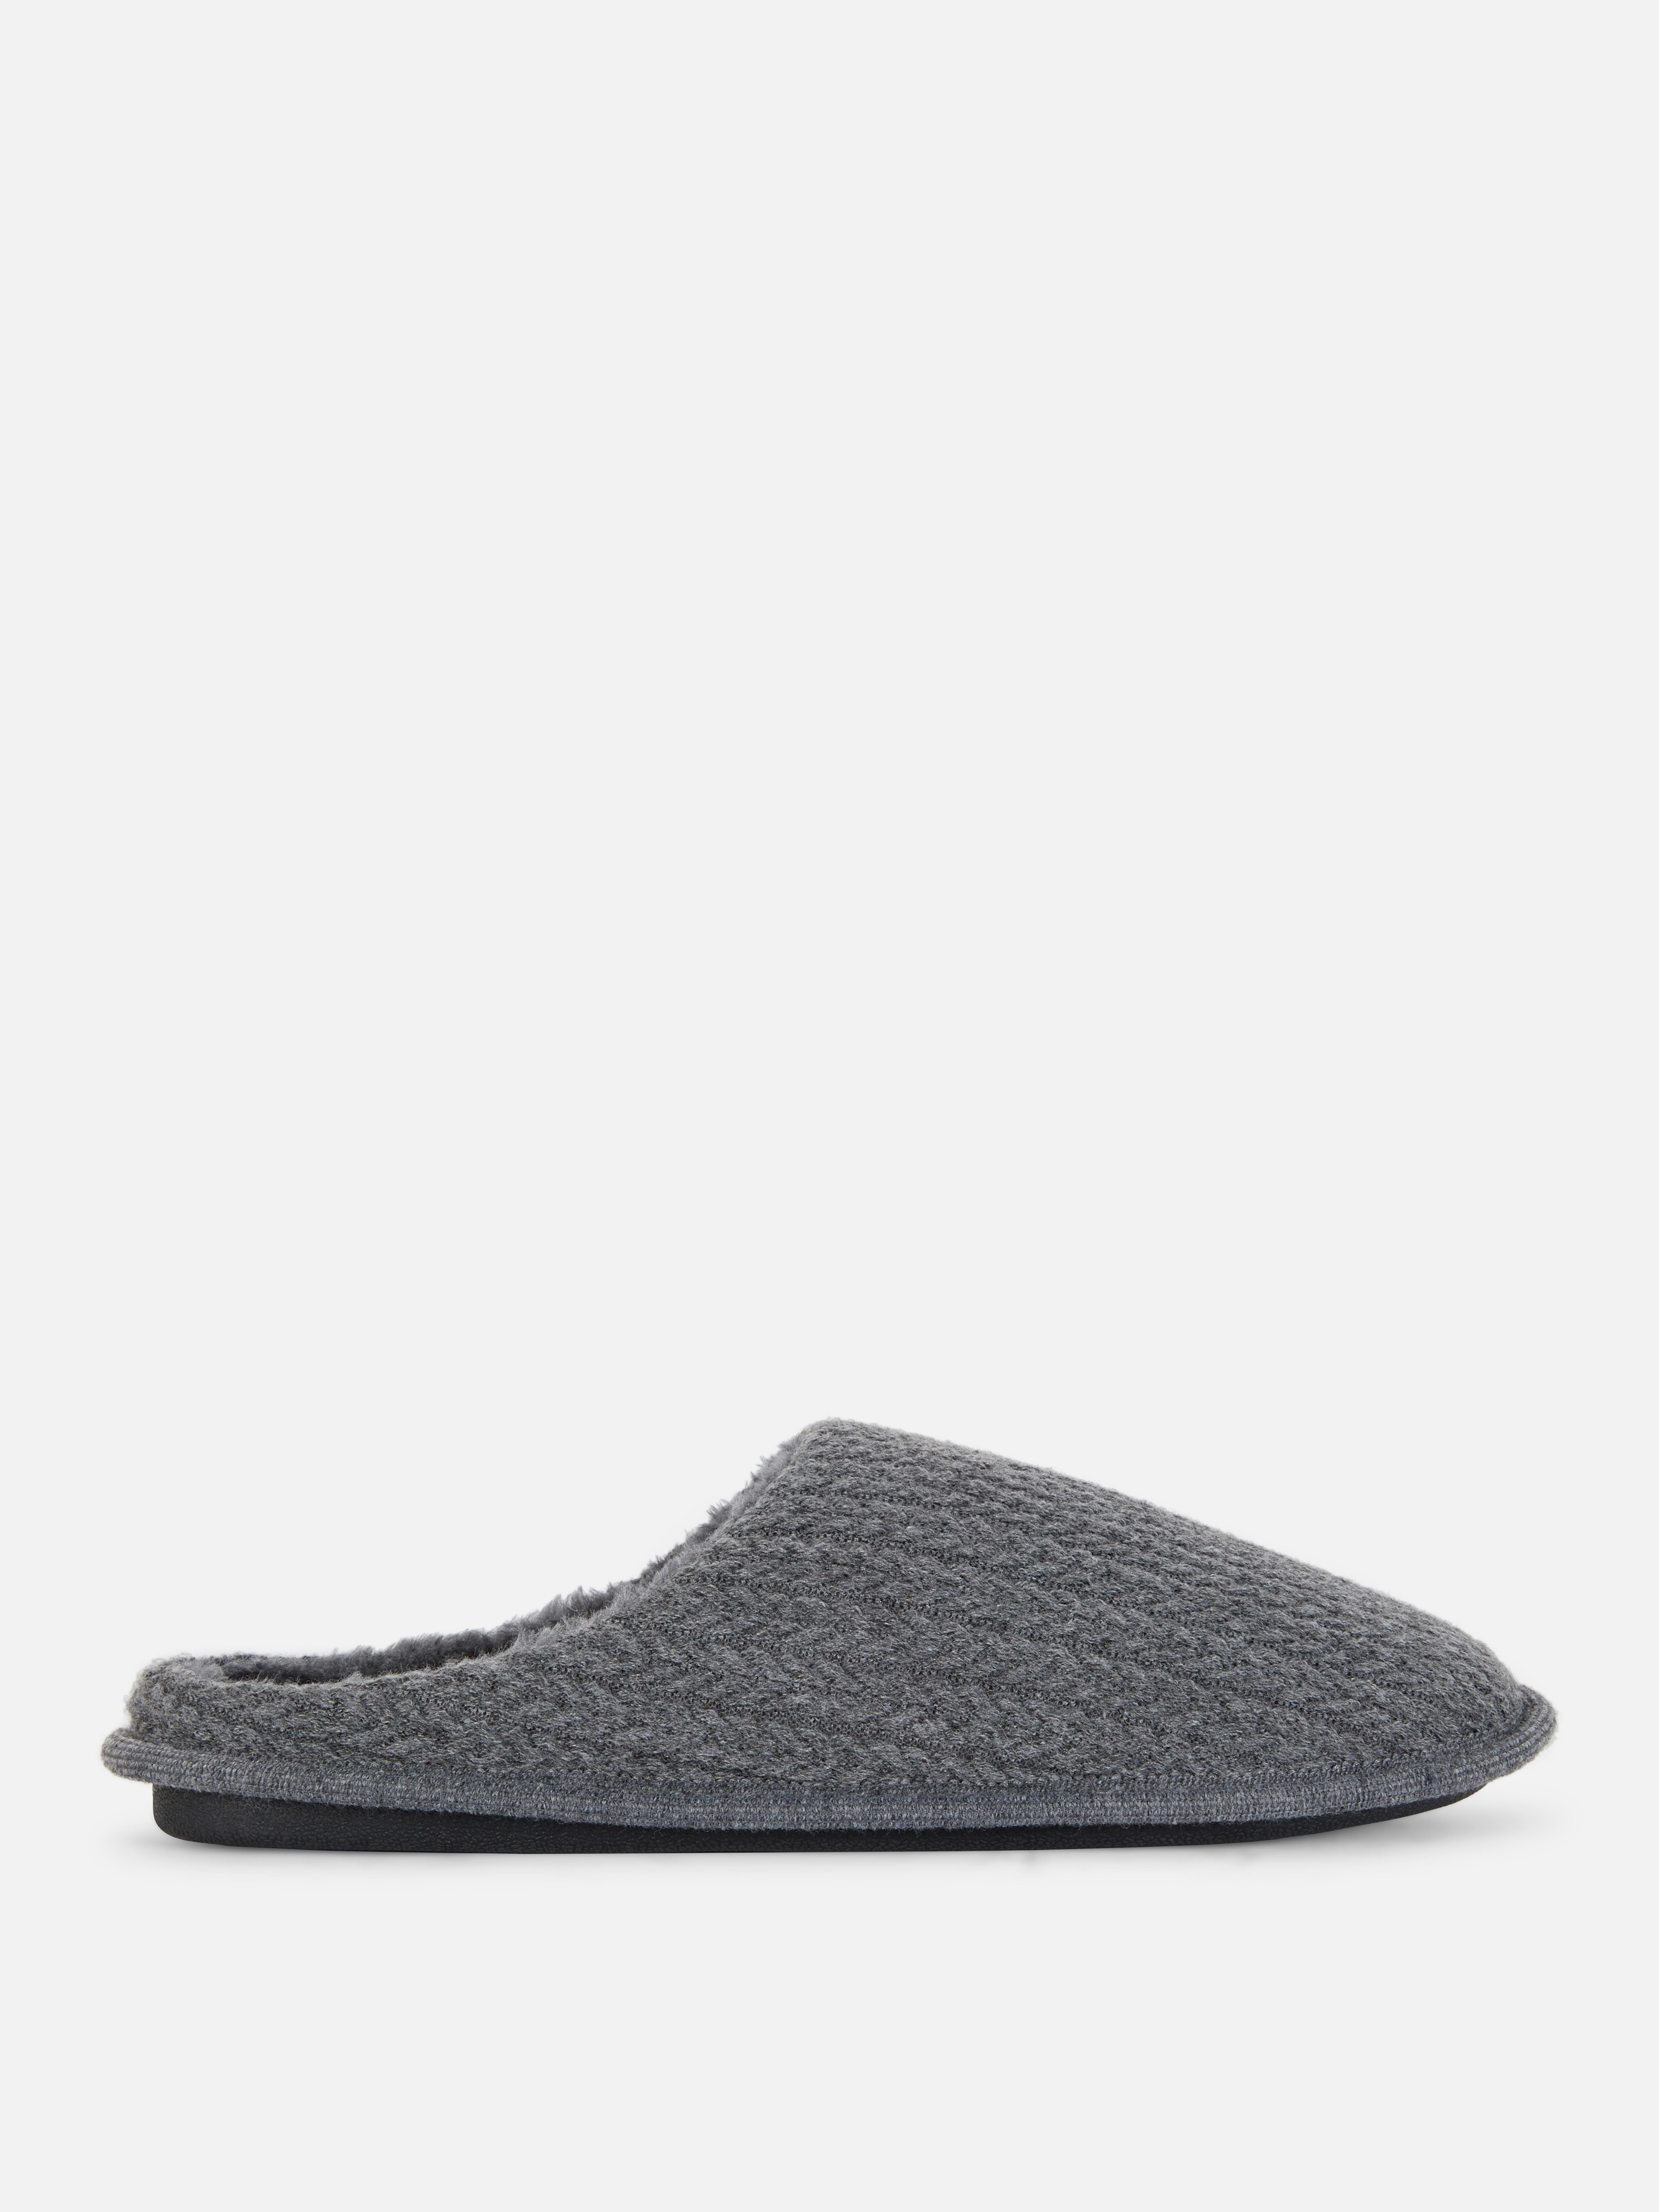 Knit Slippers Charcoal